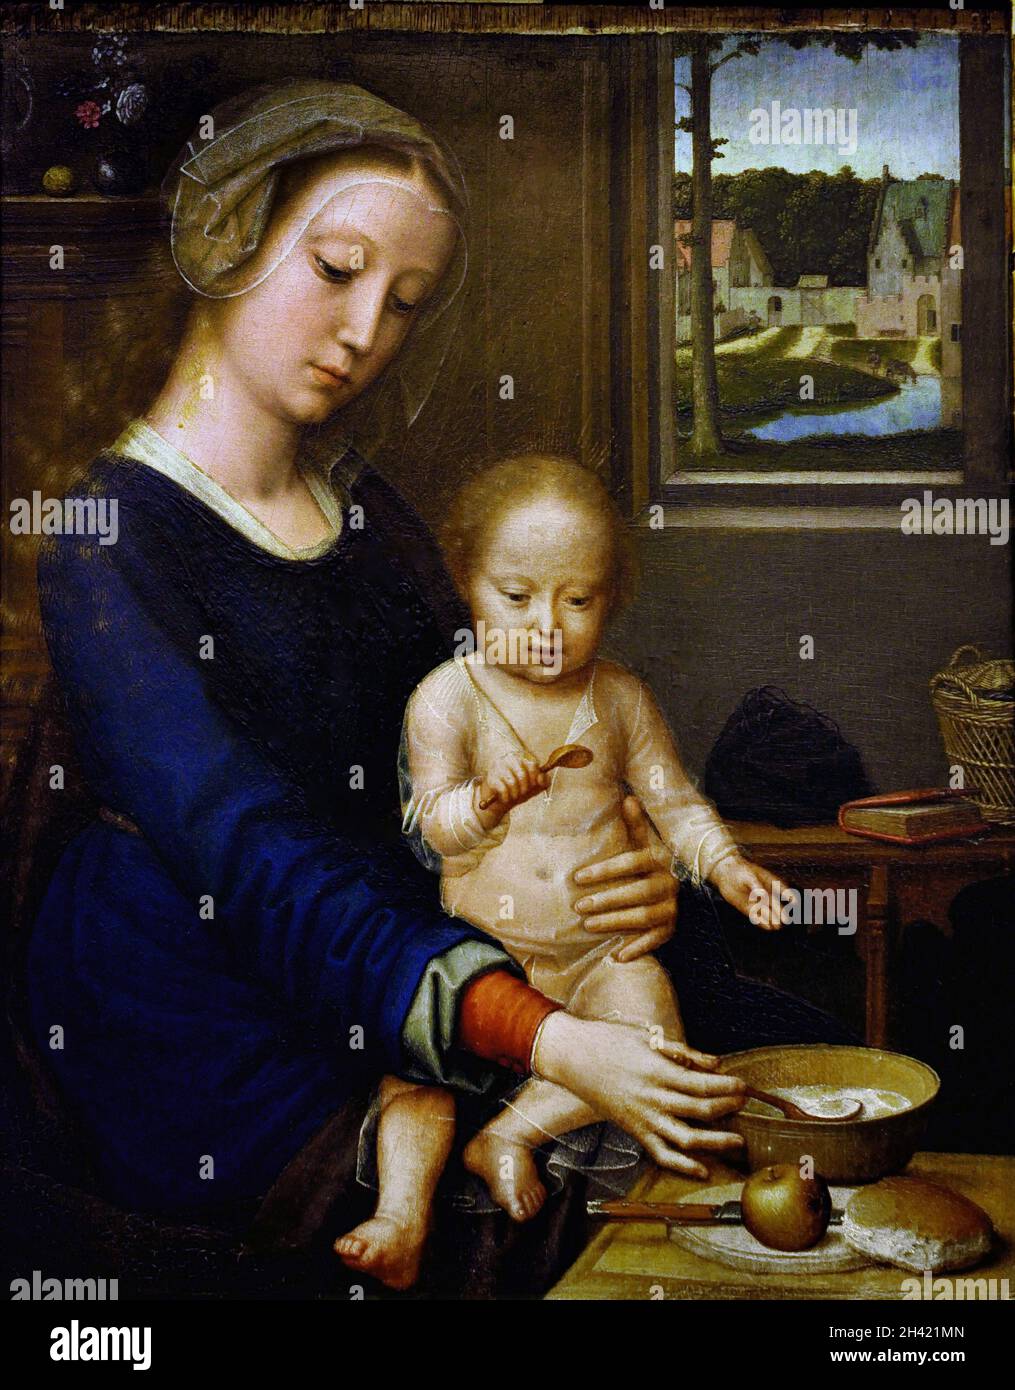 Madonna and Child with the Milk Soup, 1510-1515. by Gerard DAVID 1450 - 1523 Belgian Belgium Dutch Netherlands Stock Photo